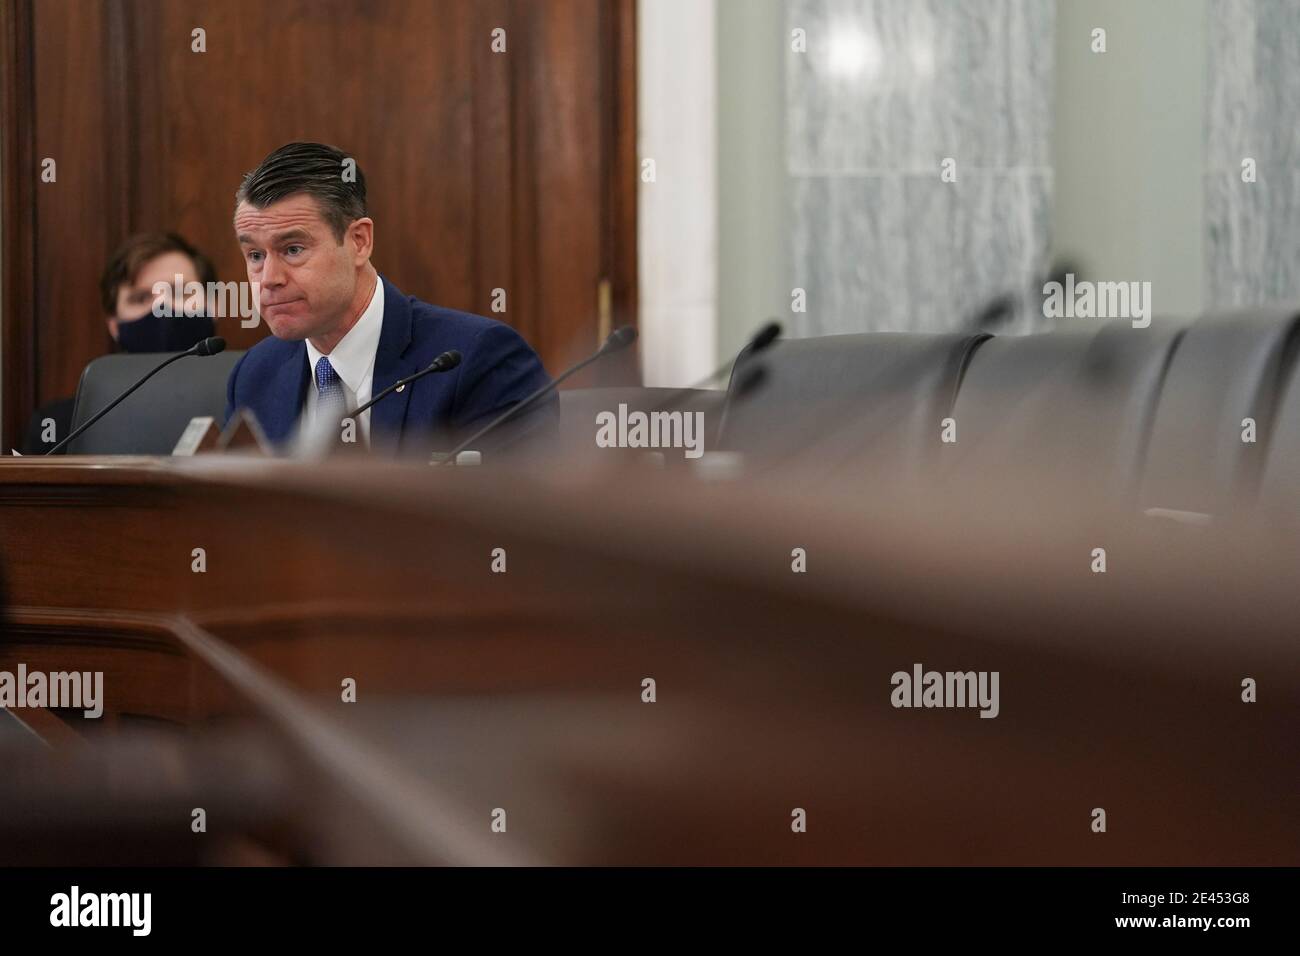 United States Senator Todd Young (Republican of Indiana), speaks during a Senate Commerce, Science and Transportation Committee confirmation hearing for U.S. Secretary of Transportation nominee Pete Buttigieg in Washington, DC, U.S., on Thursday, Jan. 21, 2021. Buttigieg, is pledging to carry out the administration's ambitious agenda to rebuild the nation's infrastructure, calling it a 'generational opportunity' to create new jobs, fight economic inequality and stem climate change.Credit: Stefani Reynolds/Pool via CNP | usage worldwide Stock Photo